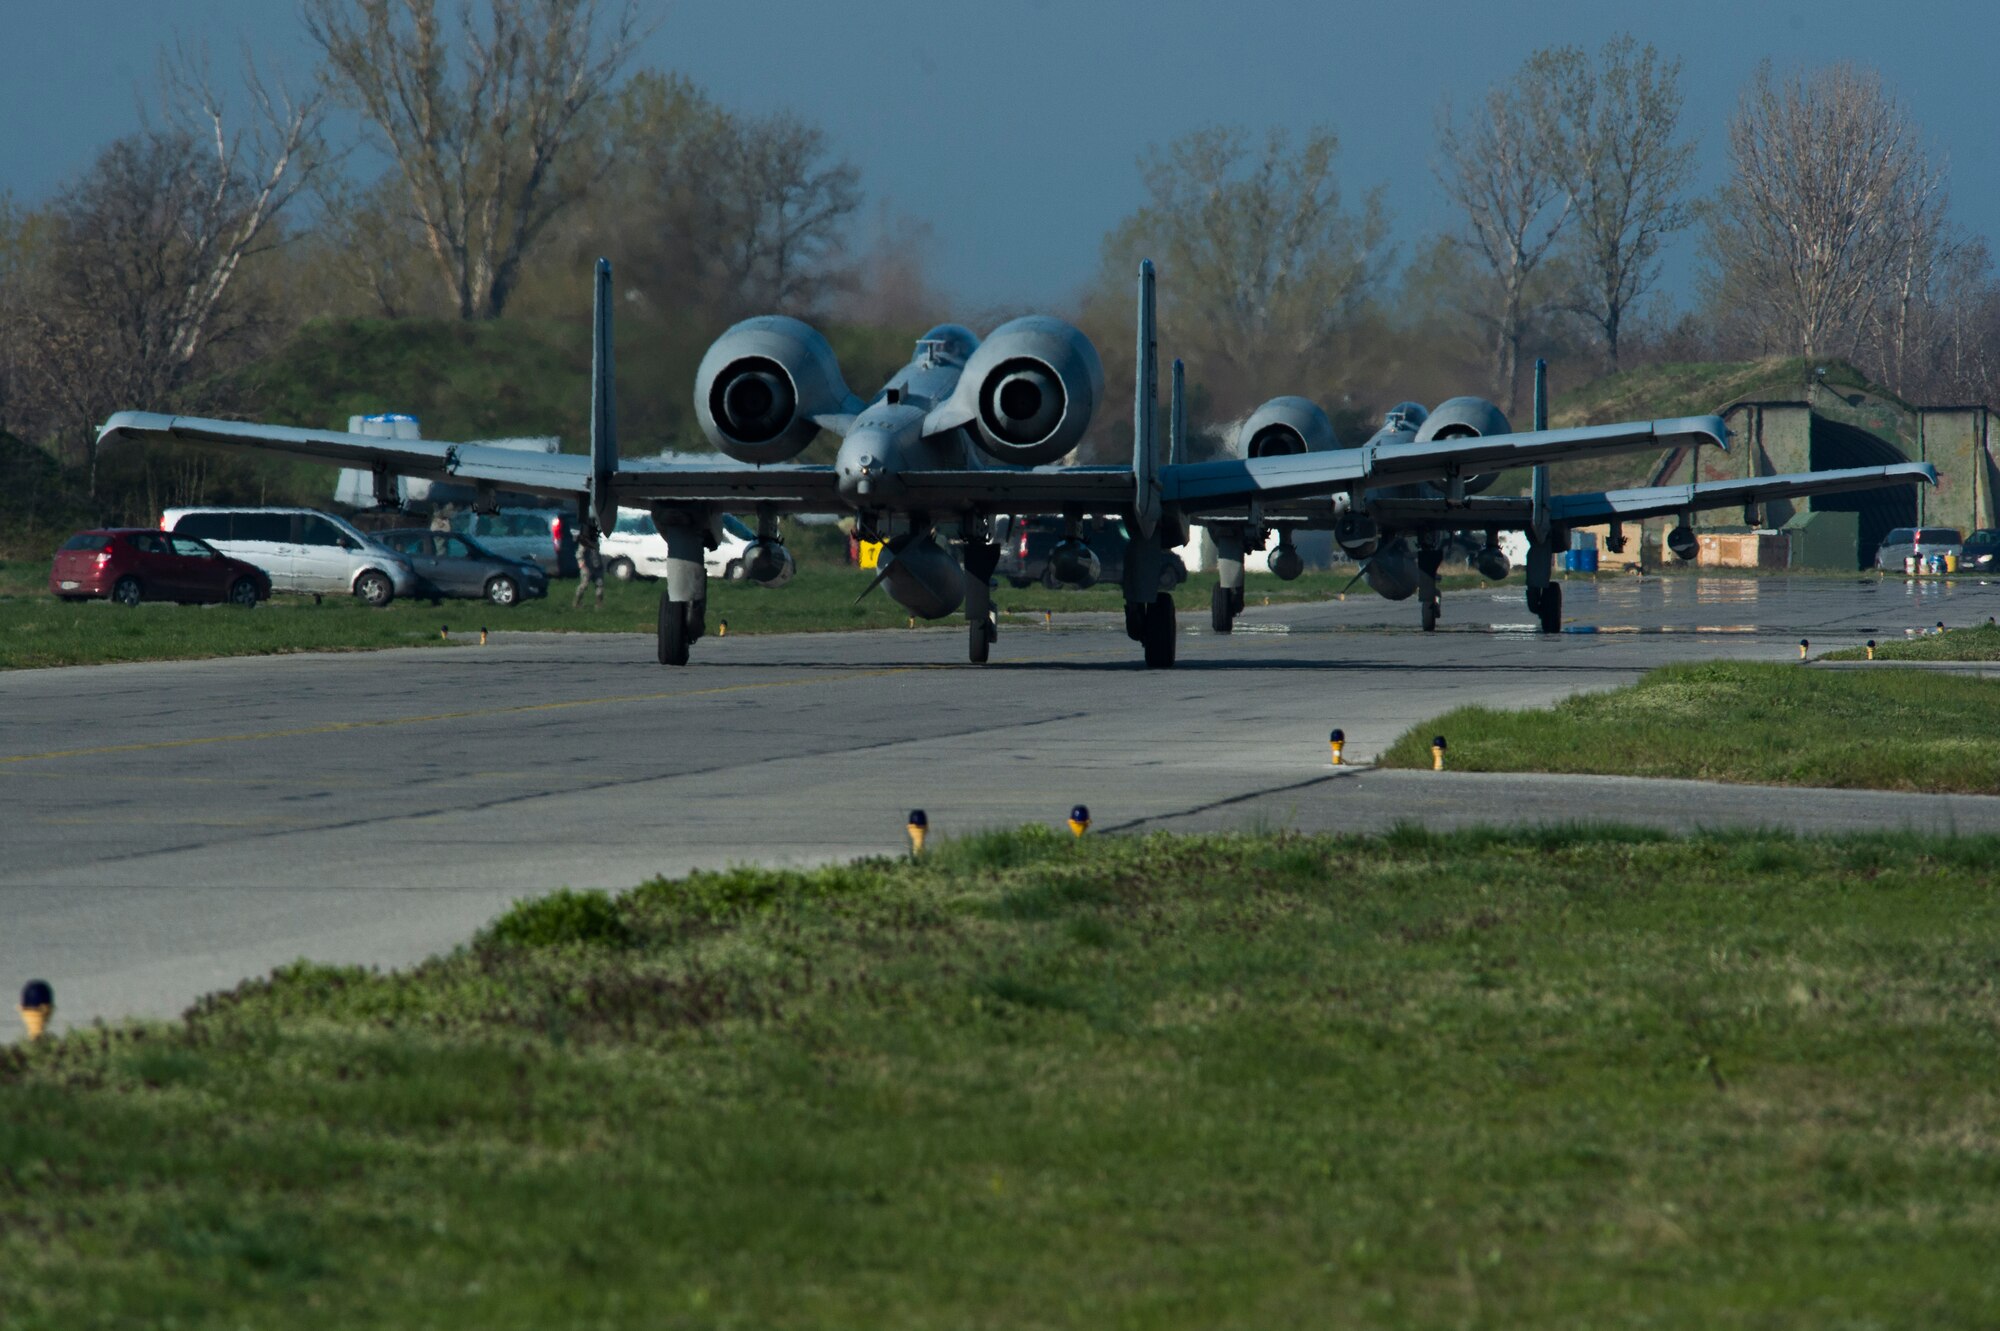 U.S. Air Force A-10 Thunderbolt II assigned to the 74th Expeditionary Fighter Squadron taxi down the runway during the 74th EFS’s deployment in support of Operation Atlantic Resolve at Graf Ignatievo, Bulgaria, March 18, 2016. The squadron trained alongside NATO allies and partners from 14 nations as a part of the six-month deployment aimed to ensure the security of the European continent. (U.S. Air Force photo by Staff Sgt. Joe W. McFadden/Released)